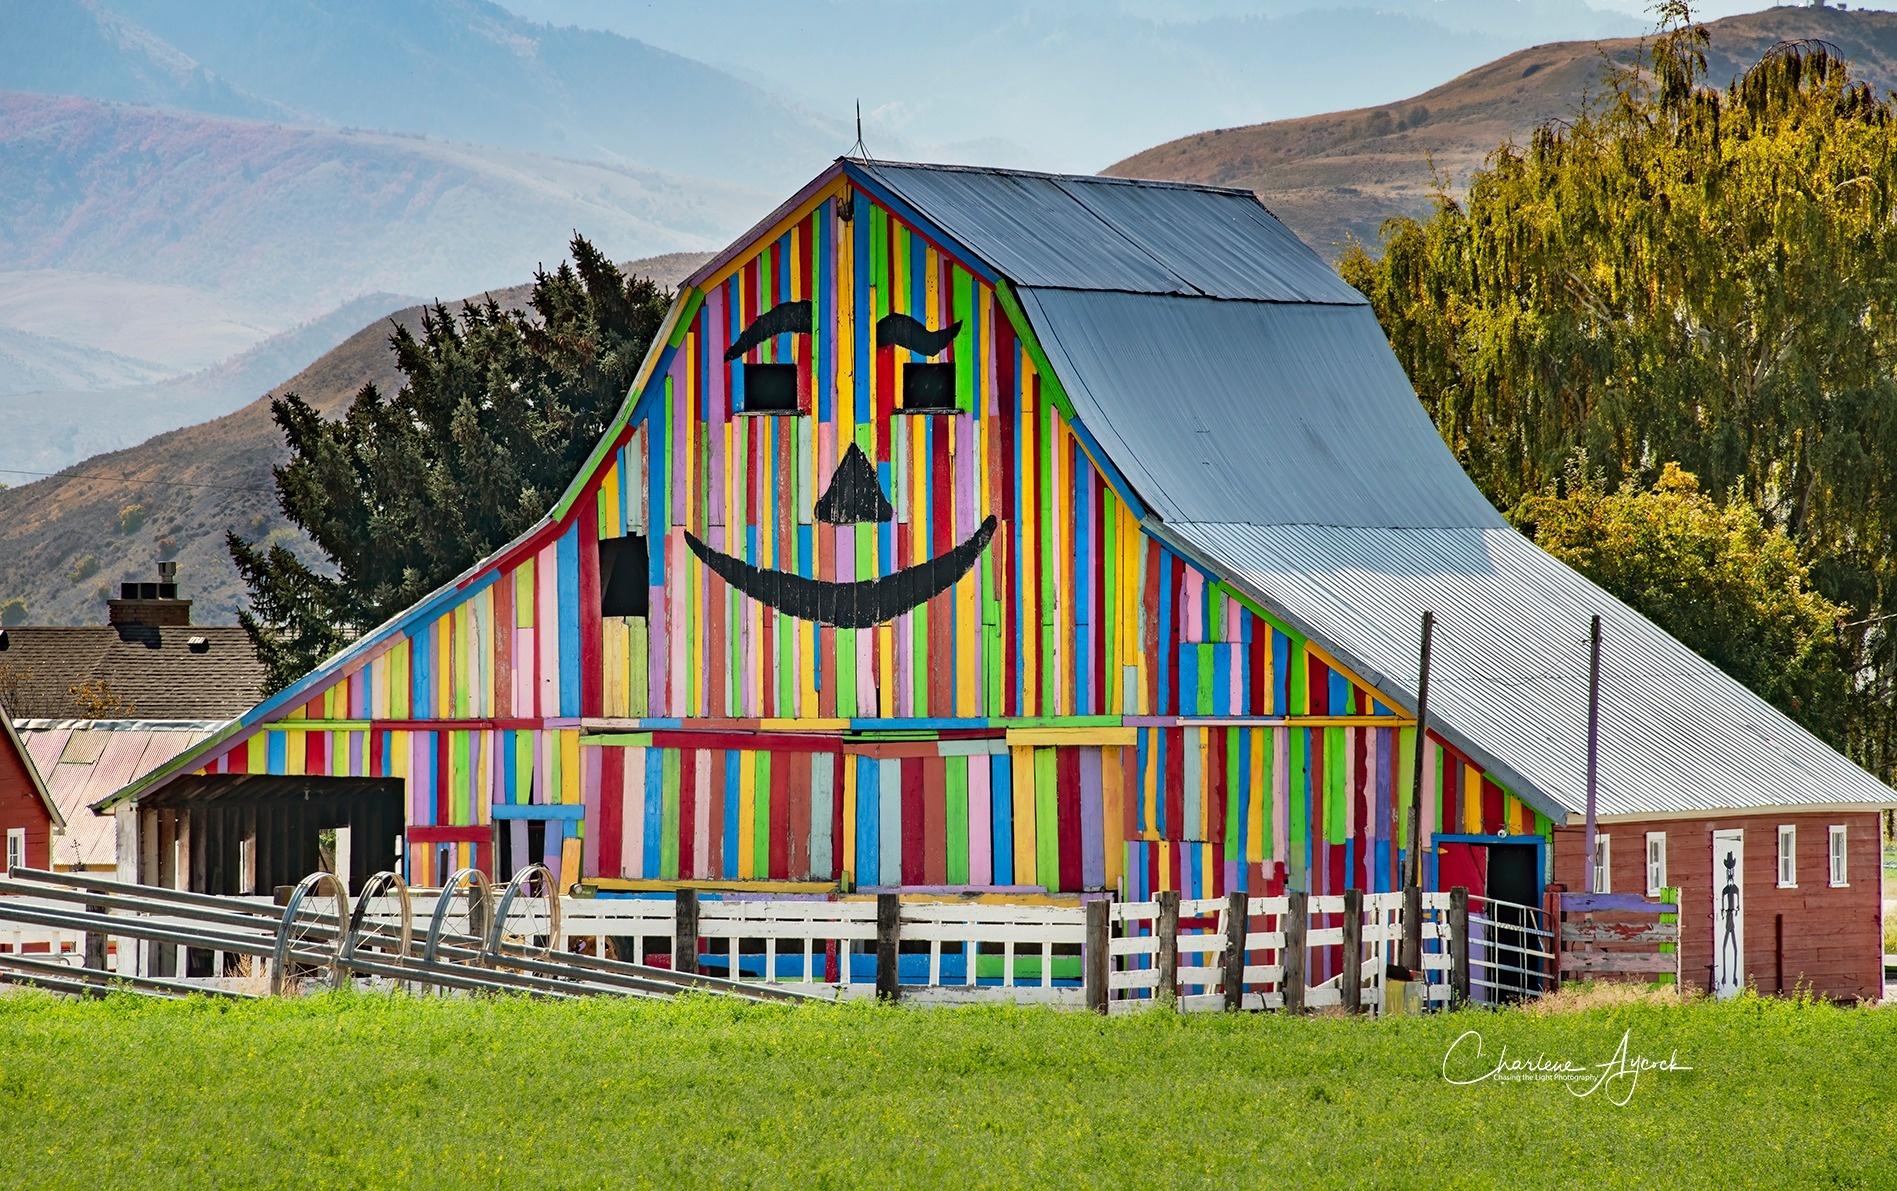 This barn is famous near Preston, ID. Puts a smile on your face when you see it. Photo by Charlene Aycock. From the September 2022 photo contest.